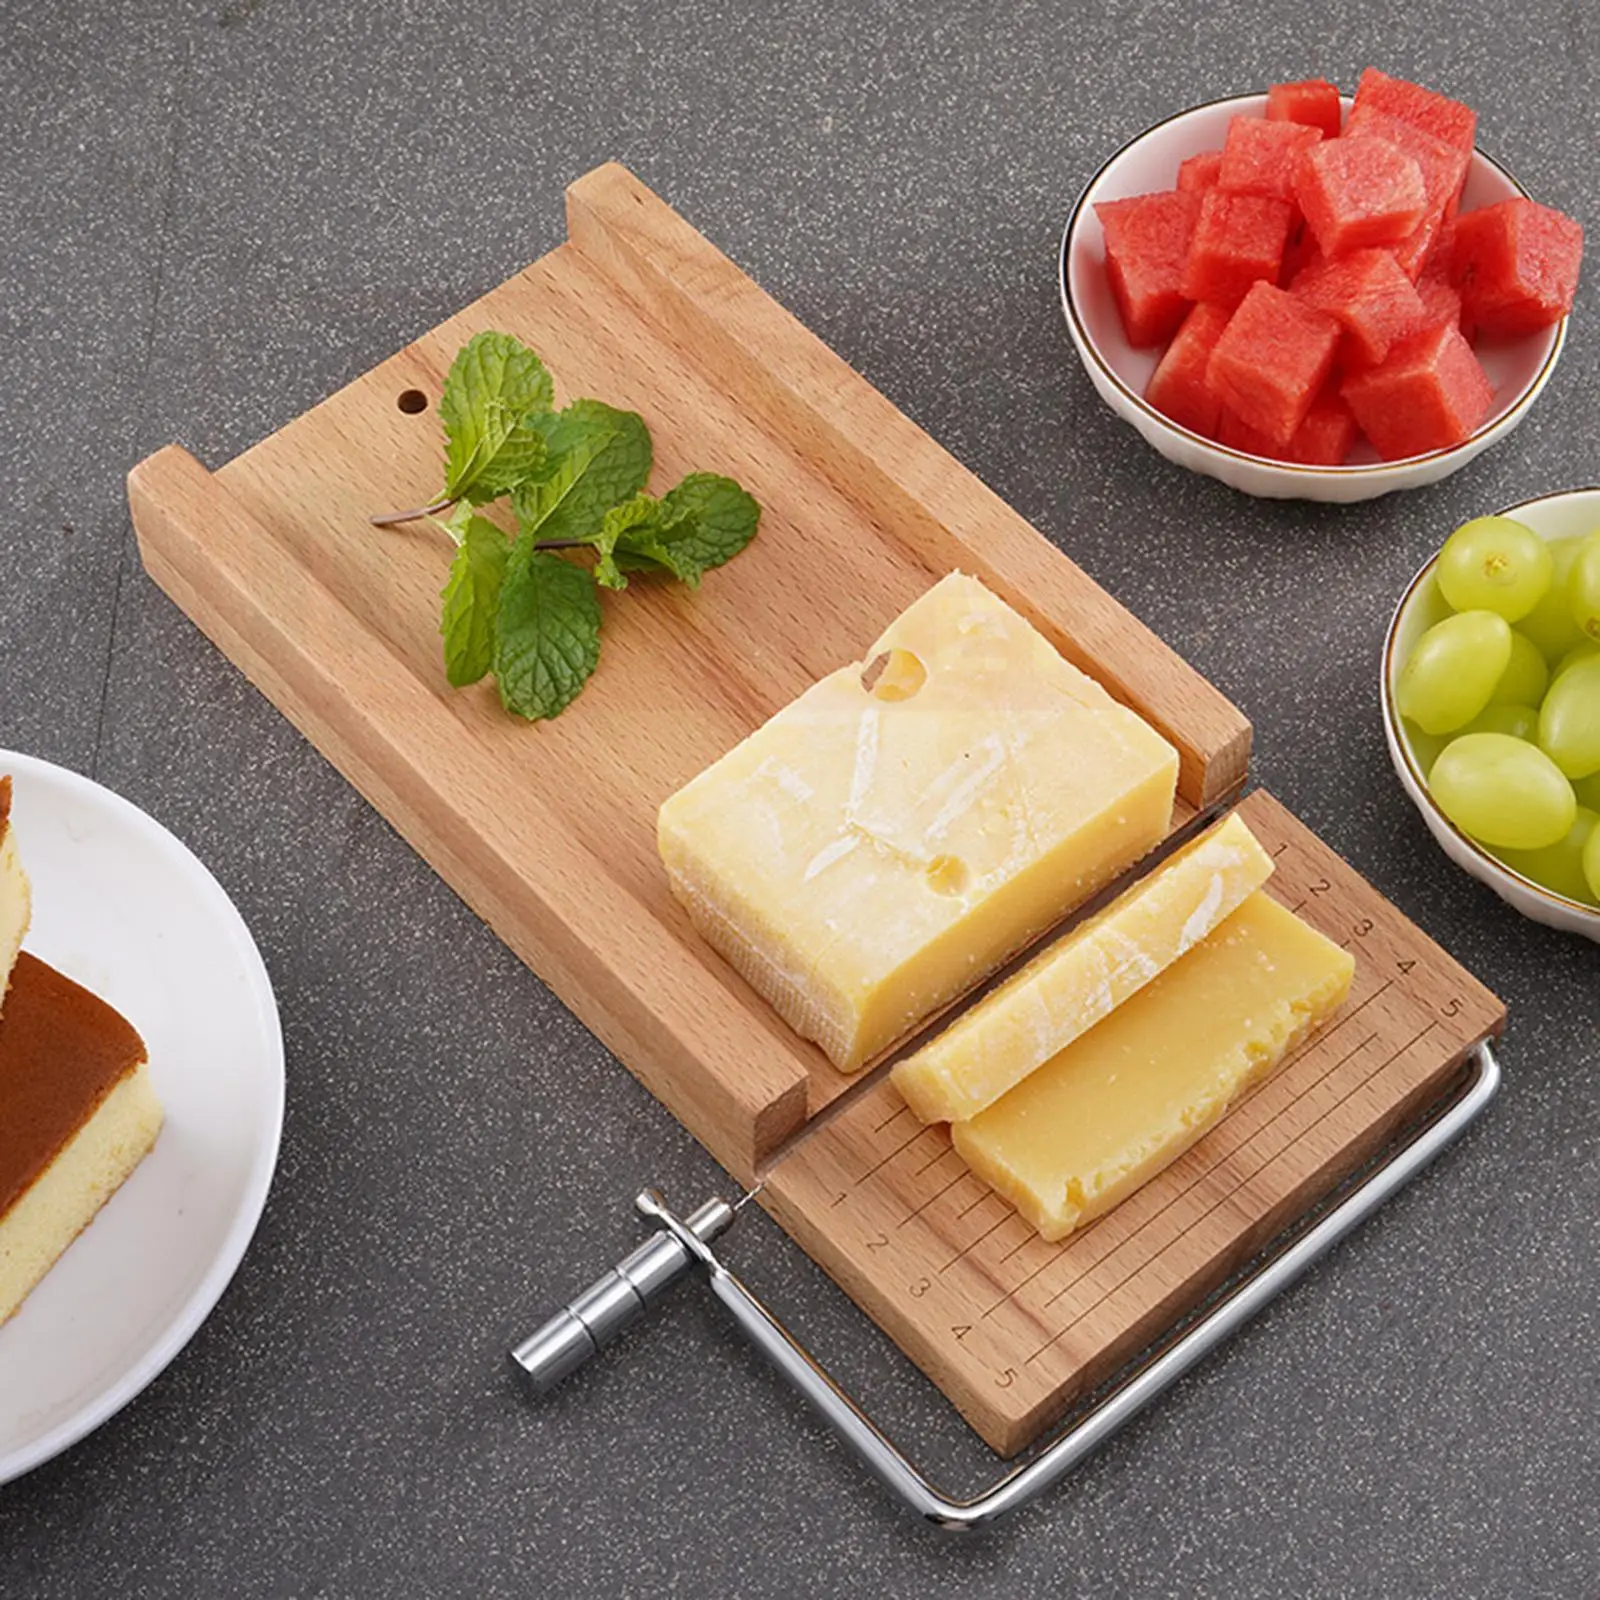 Wooden Cheese Slicer Cheese Cutter Board Home Adjustable Thickness Platter Cutting Board for Soap Meats Loaf Bread Dessert